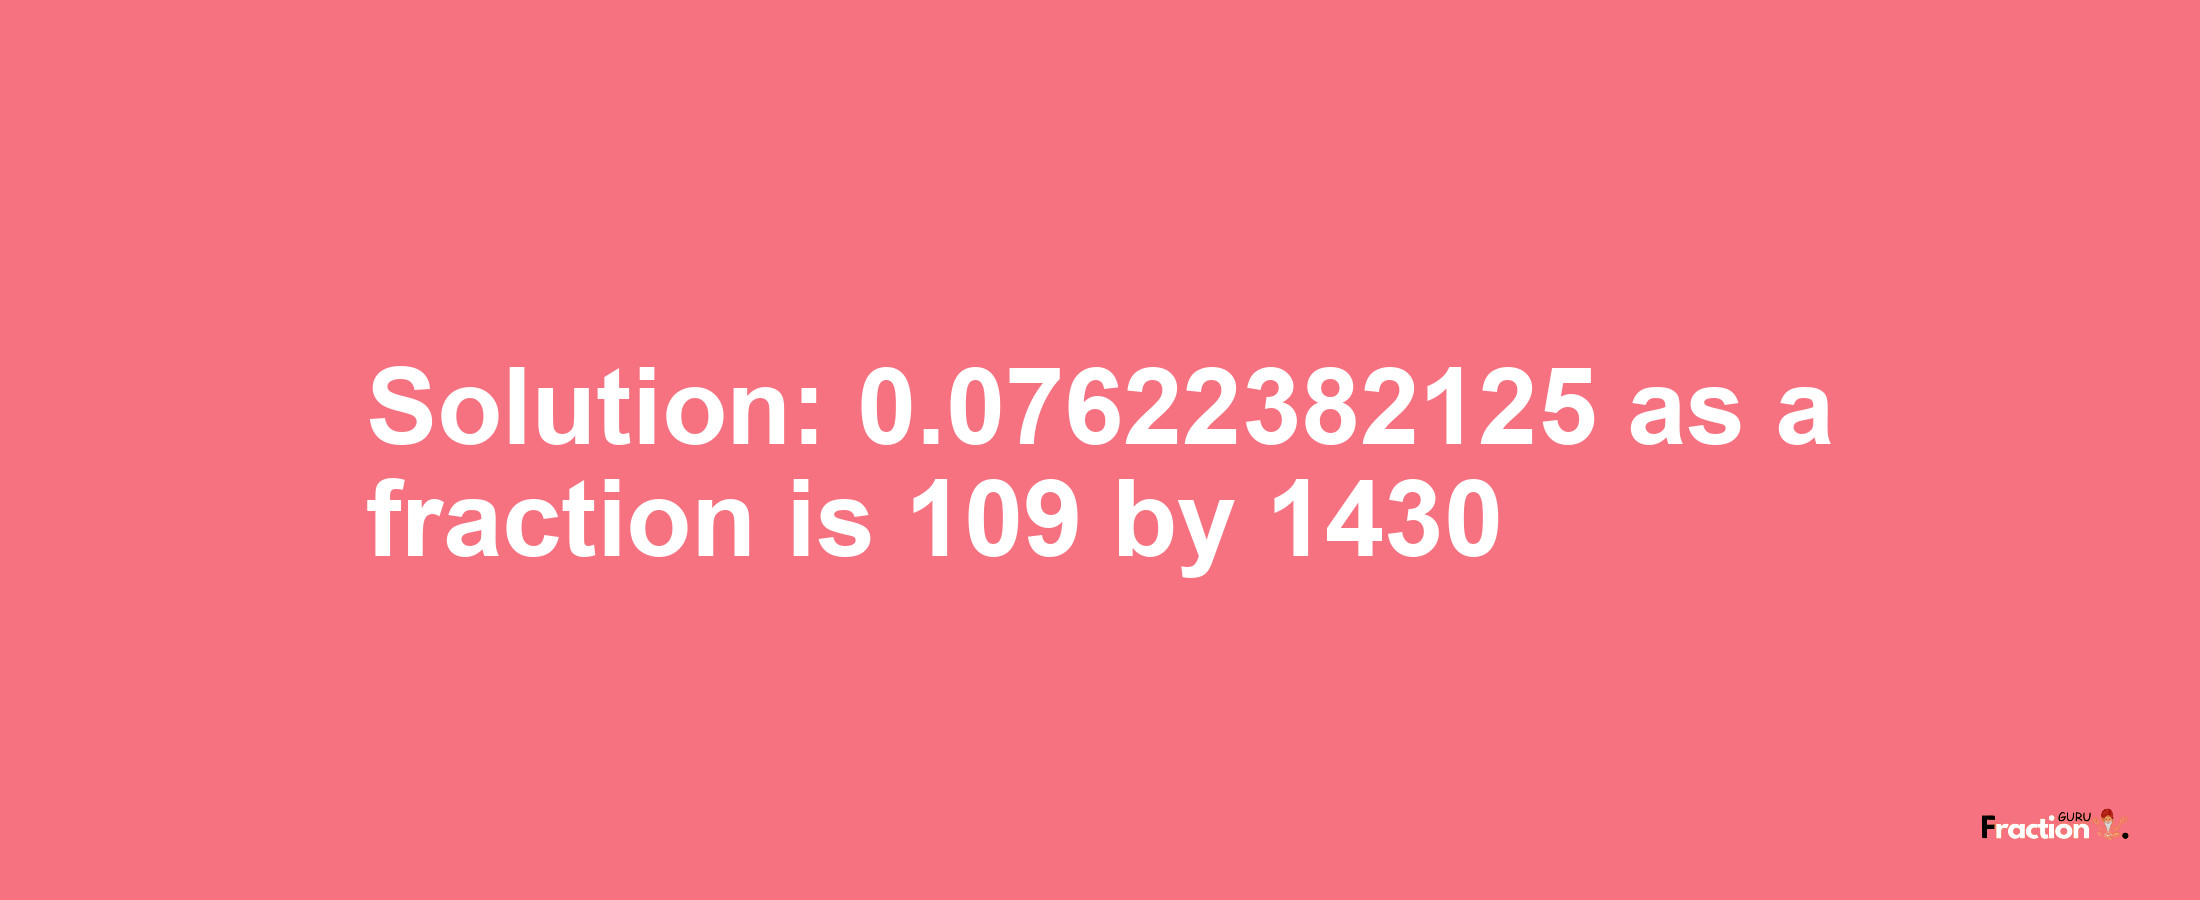 Solution:0.07622382125 as a fraction is 109/1430